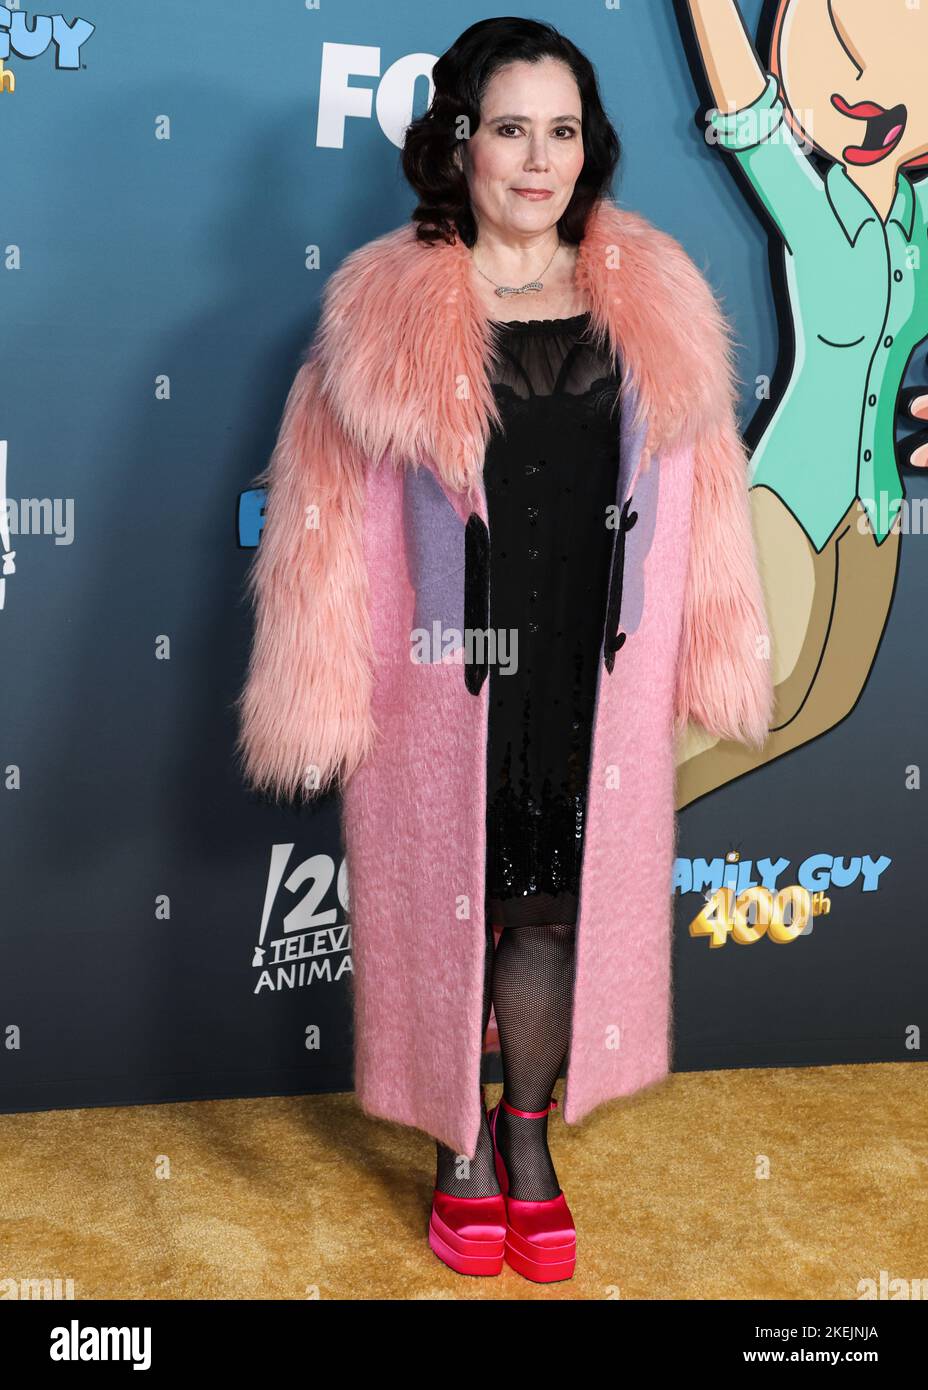 Los Angeles, United States. 12th Nov, 2022. LOS ANGELES, CALIFORNIA, USA - NOVEMBER 12: American actress, comedian, writer and producer Alex Borstein arrives at FOX's 'Family Guy' 400th Episode Celebration held at the Fox Studio Lot on November 12, 2022 in Los Angeles, California, United States. (Photo by Xavier Collin/Image Press Agency) Credit: Image Press Agency/Alamy Live News Stock Photo